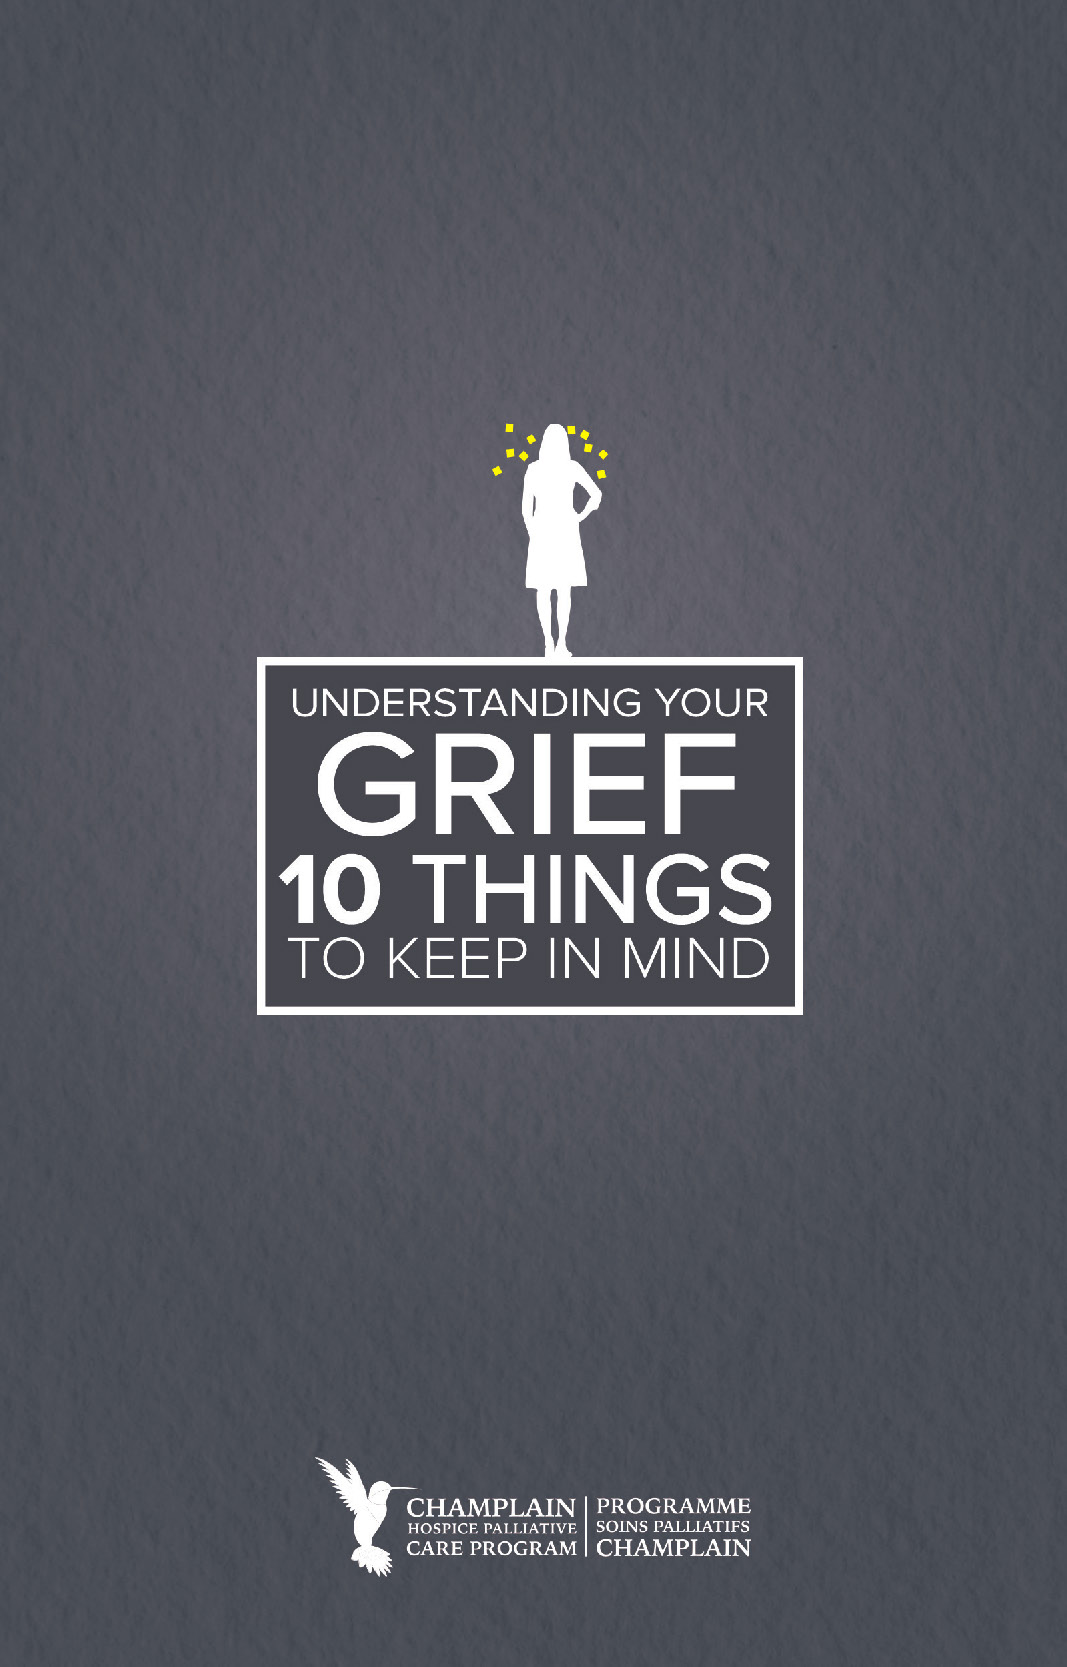 Document on understanding your grief 10 things to keep in mind